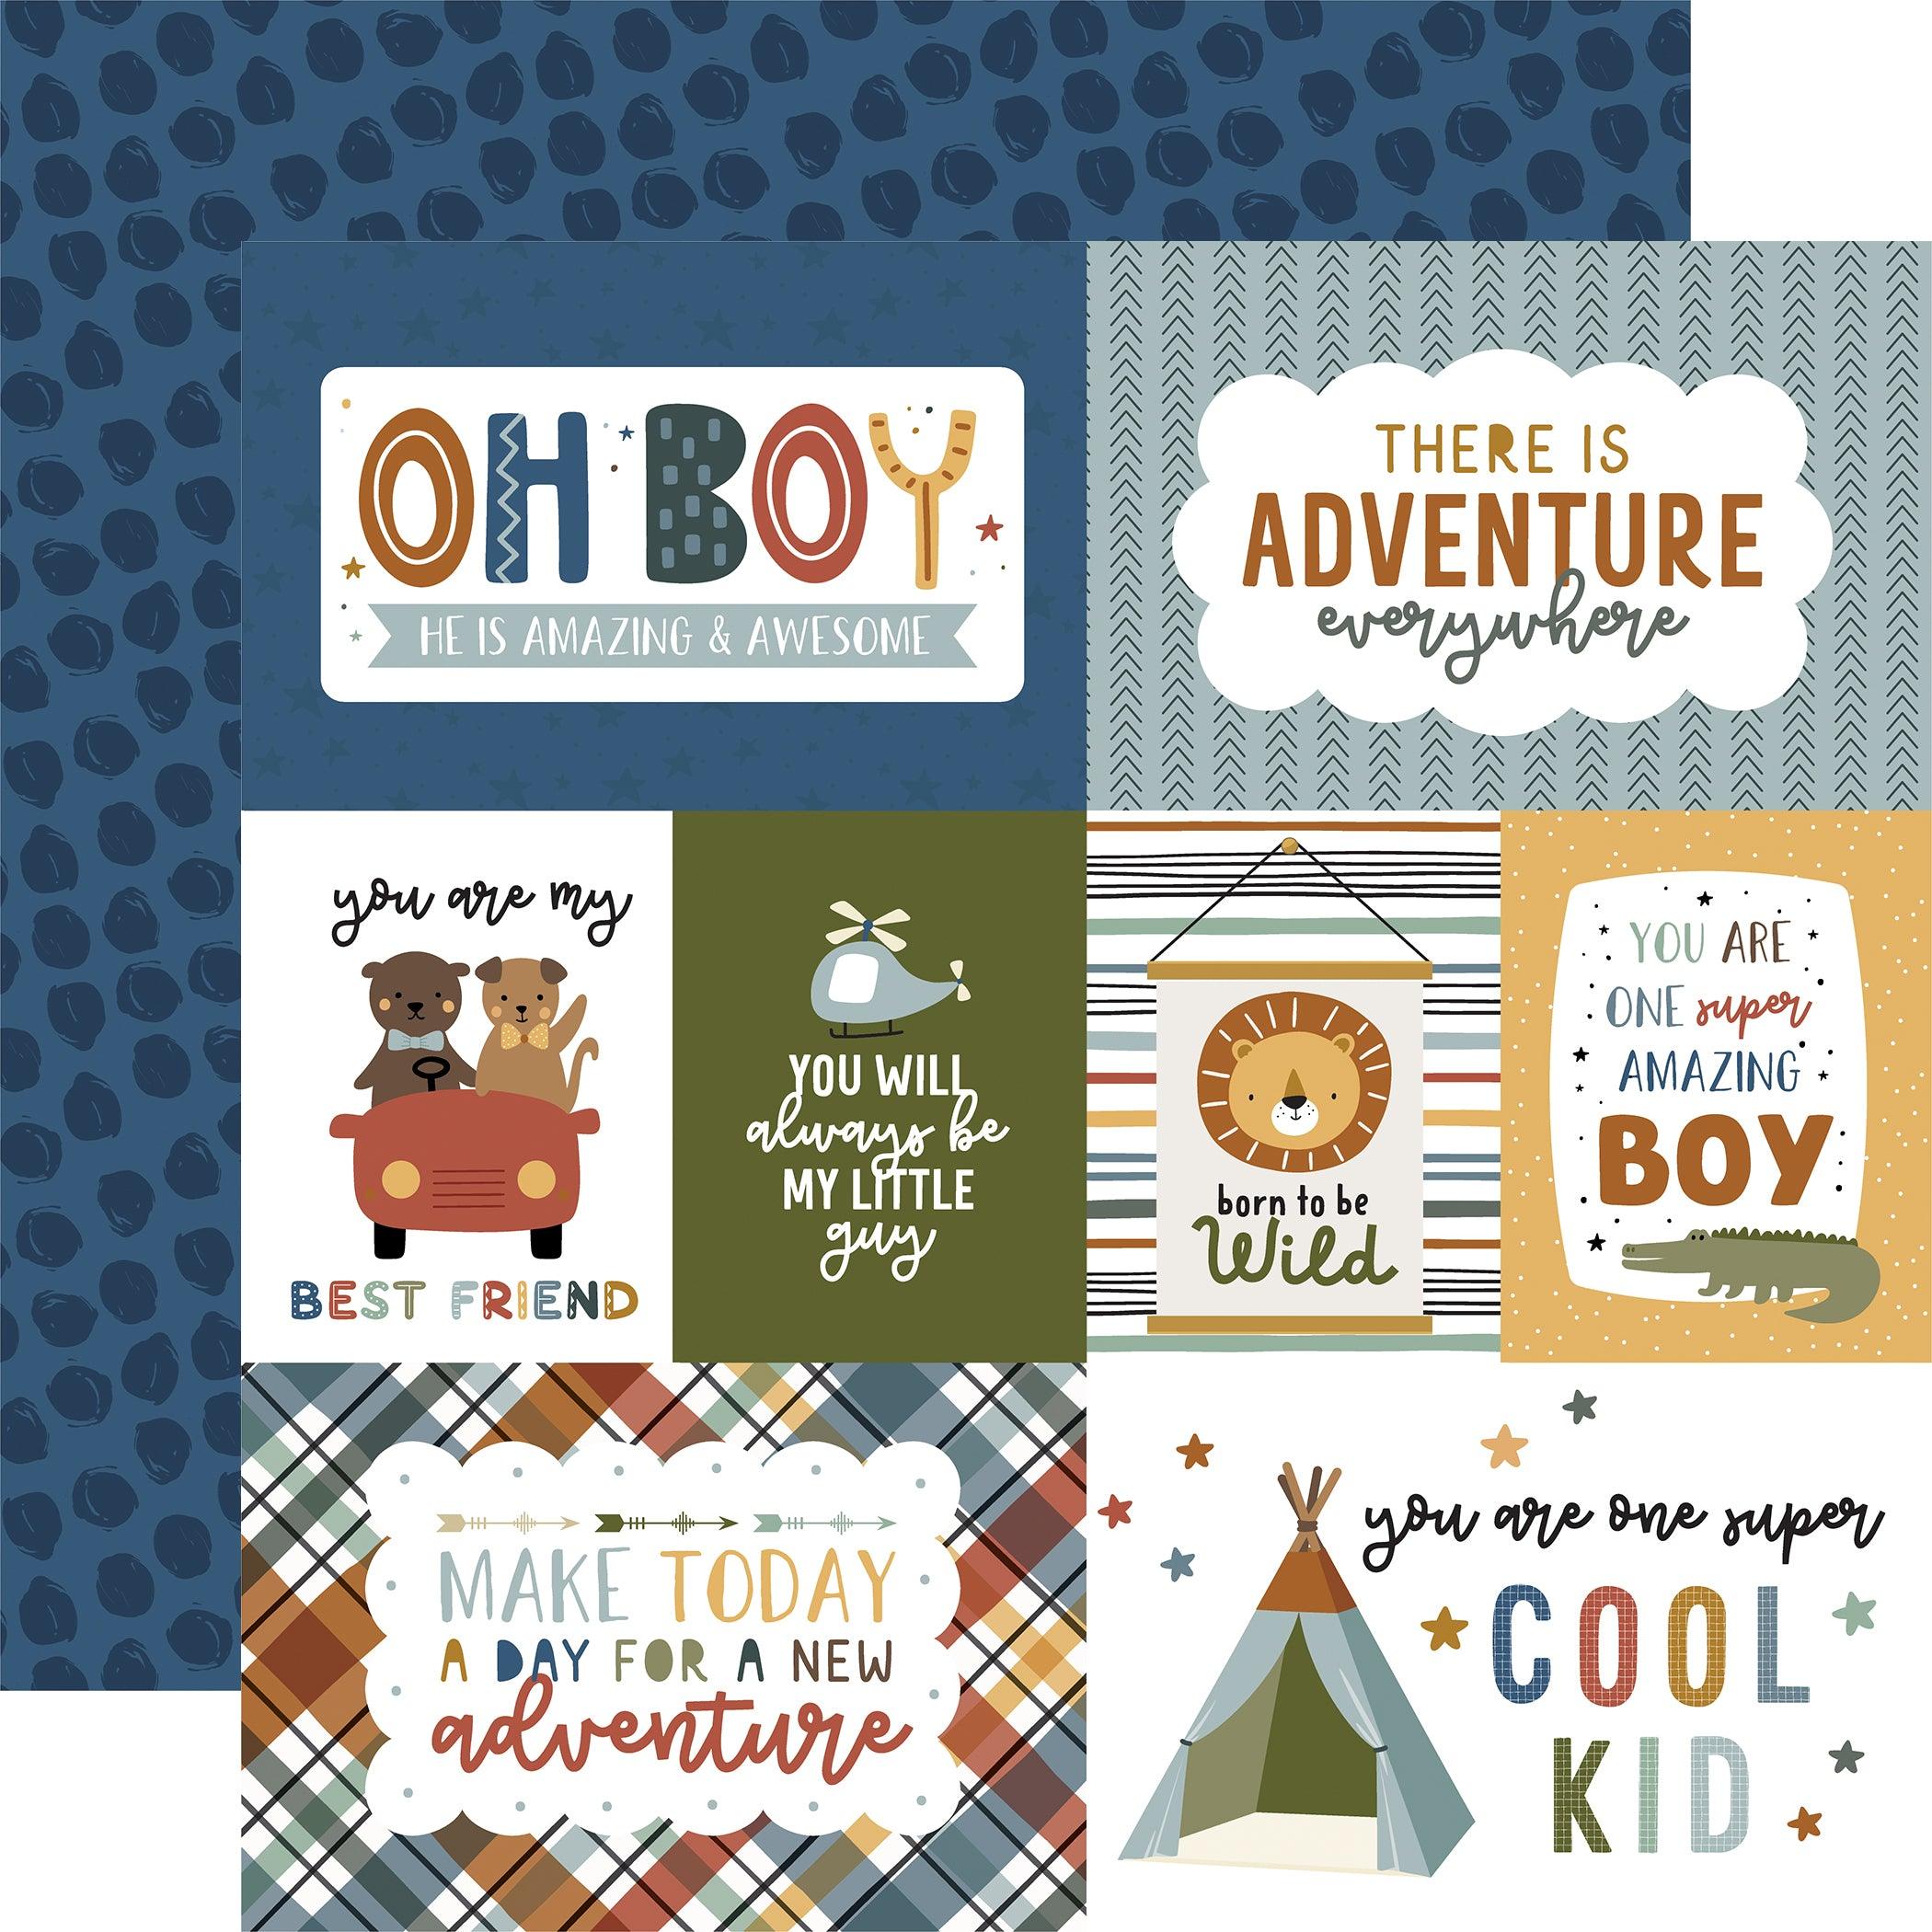 Paper House Hello Baby Cardstock Stickers 12x12 Blue Boy